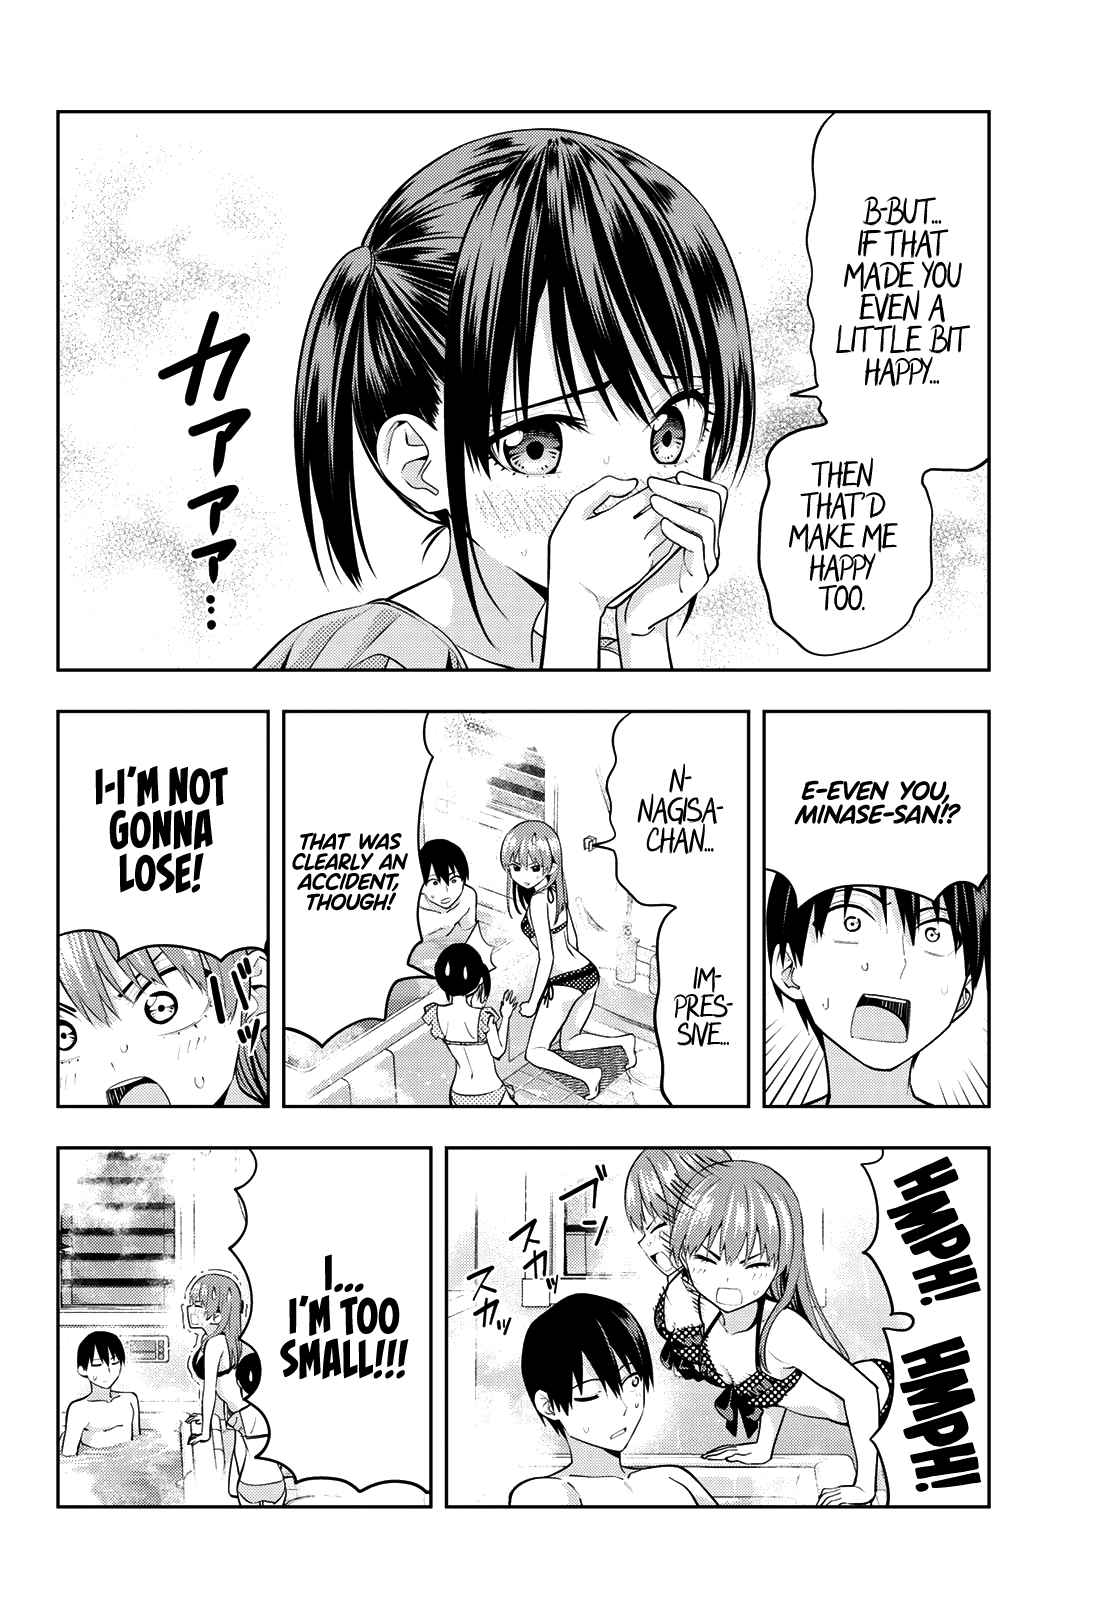 Kanojo mo Kanojo Ch. 19 What Must Be Done